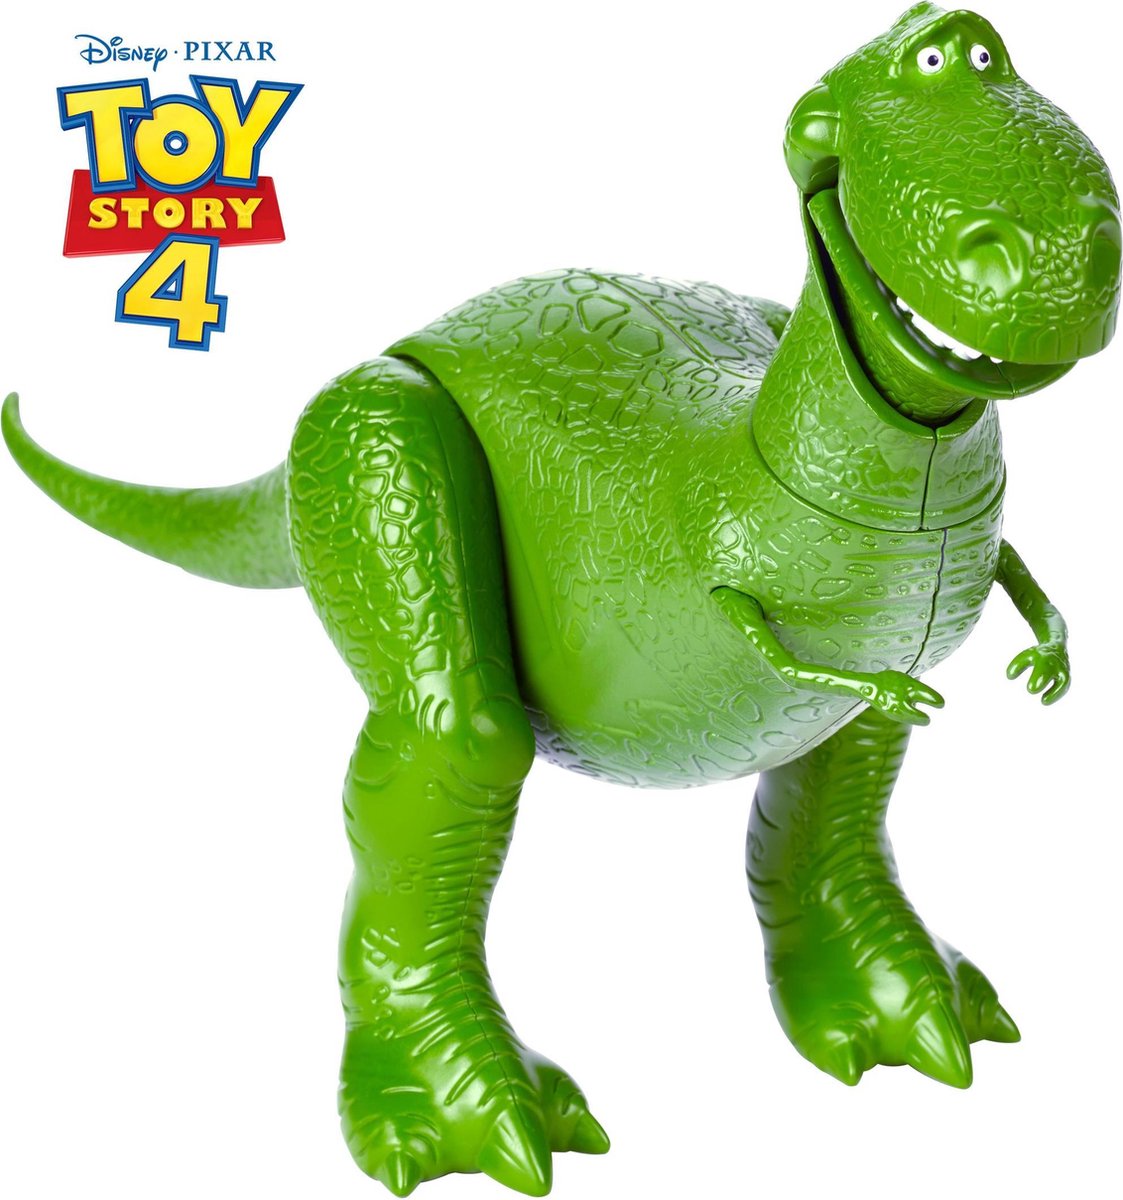 download toy story 4 rex